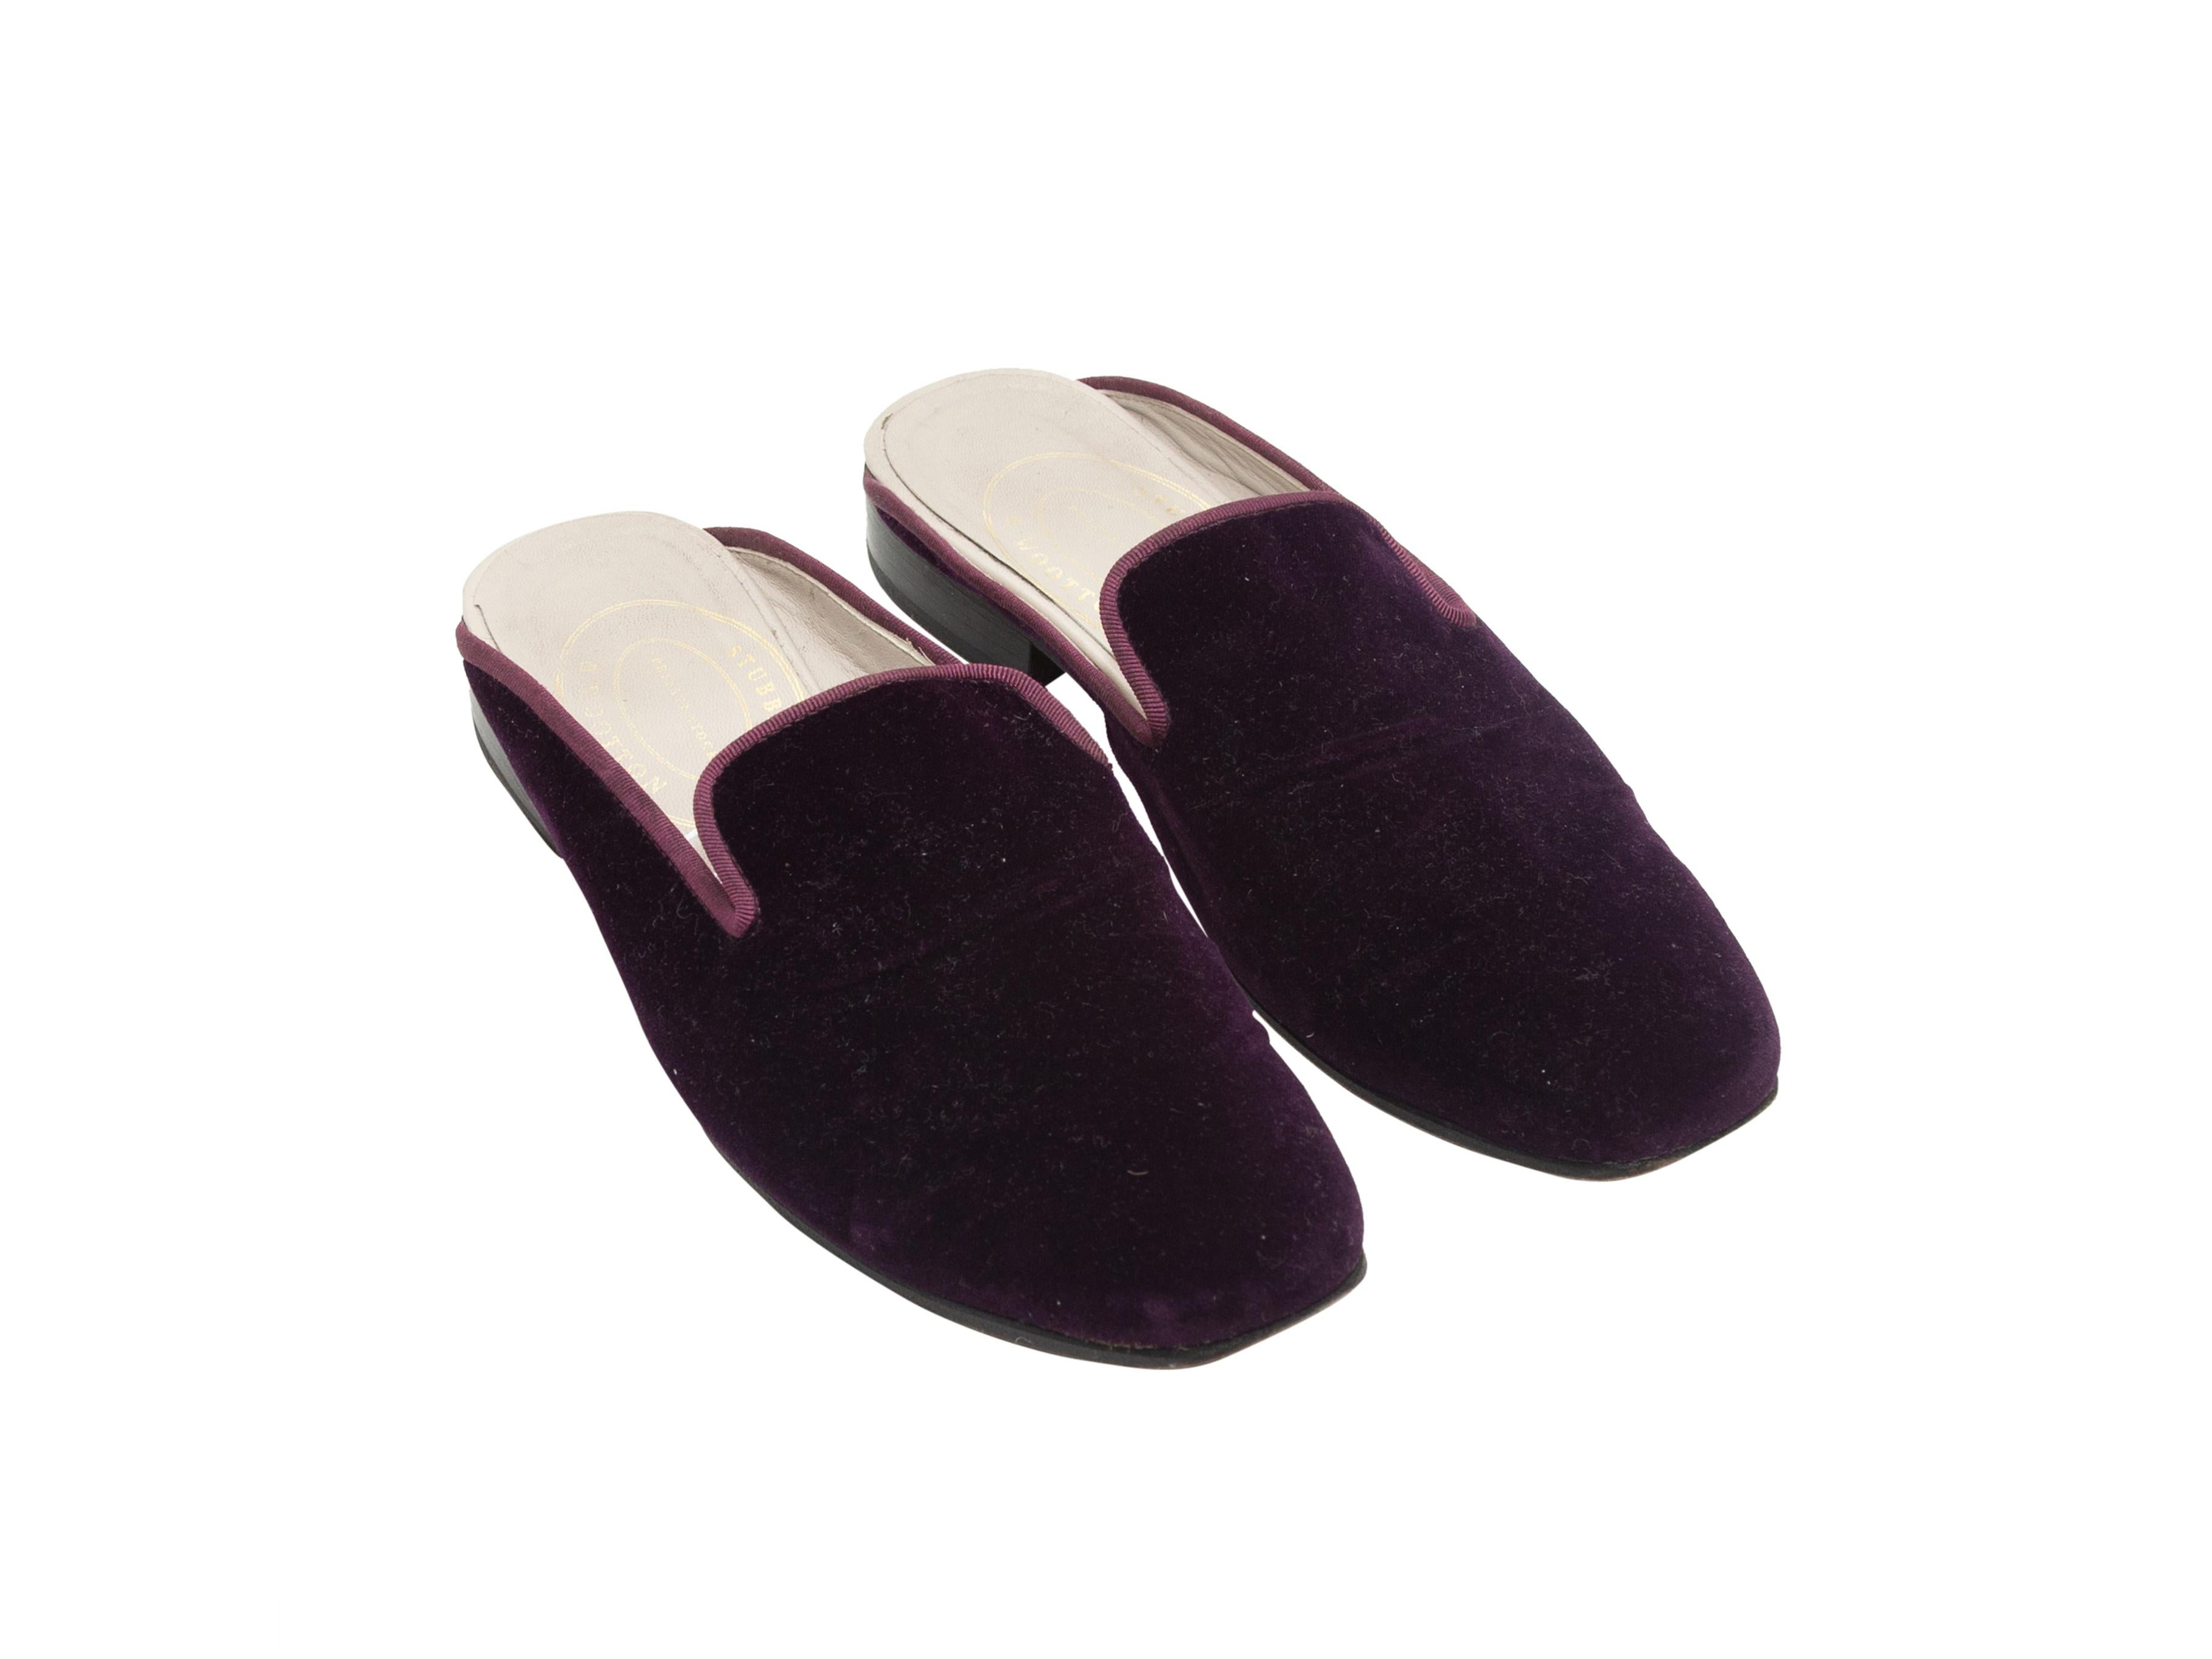 Product details: Eggplant purple velvet mules by Stubbs & Wootton. Grosgrain trim throughout. Stacked heels. 1